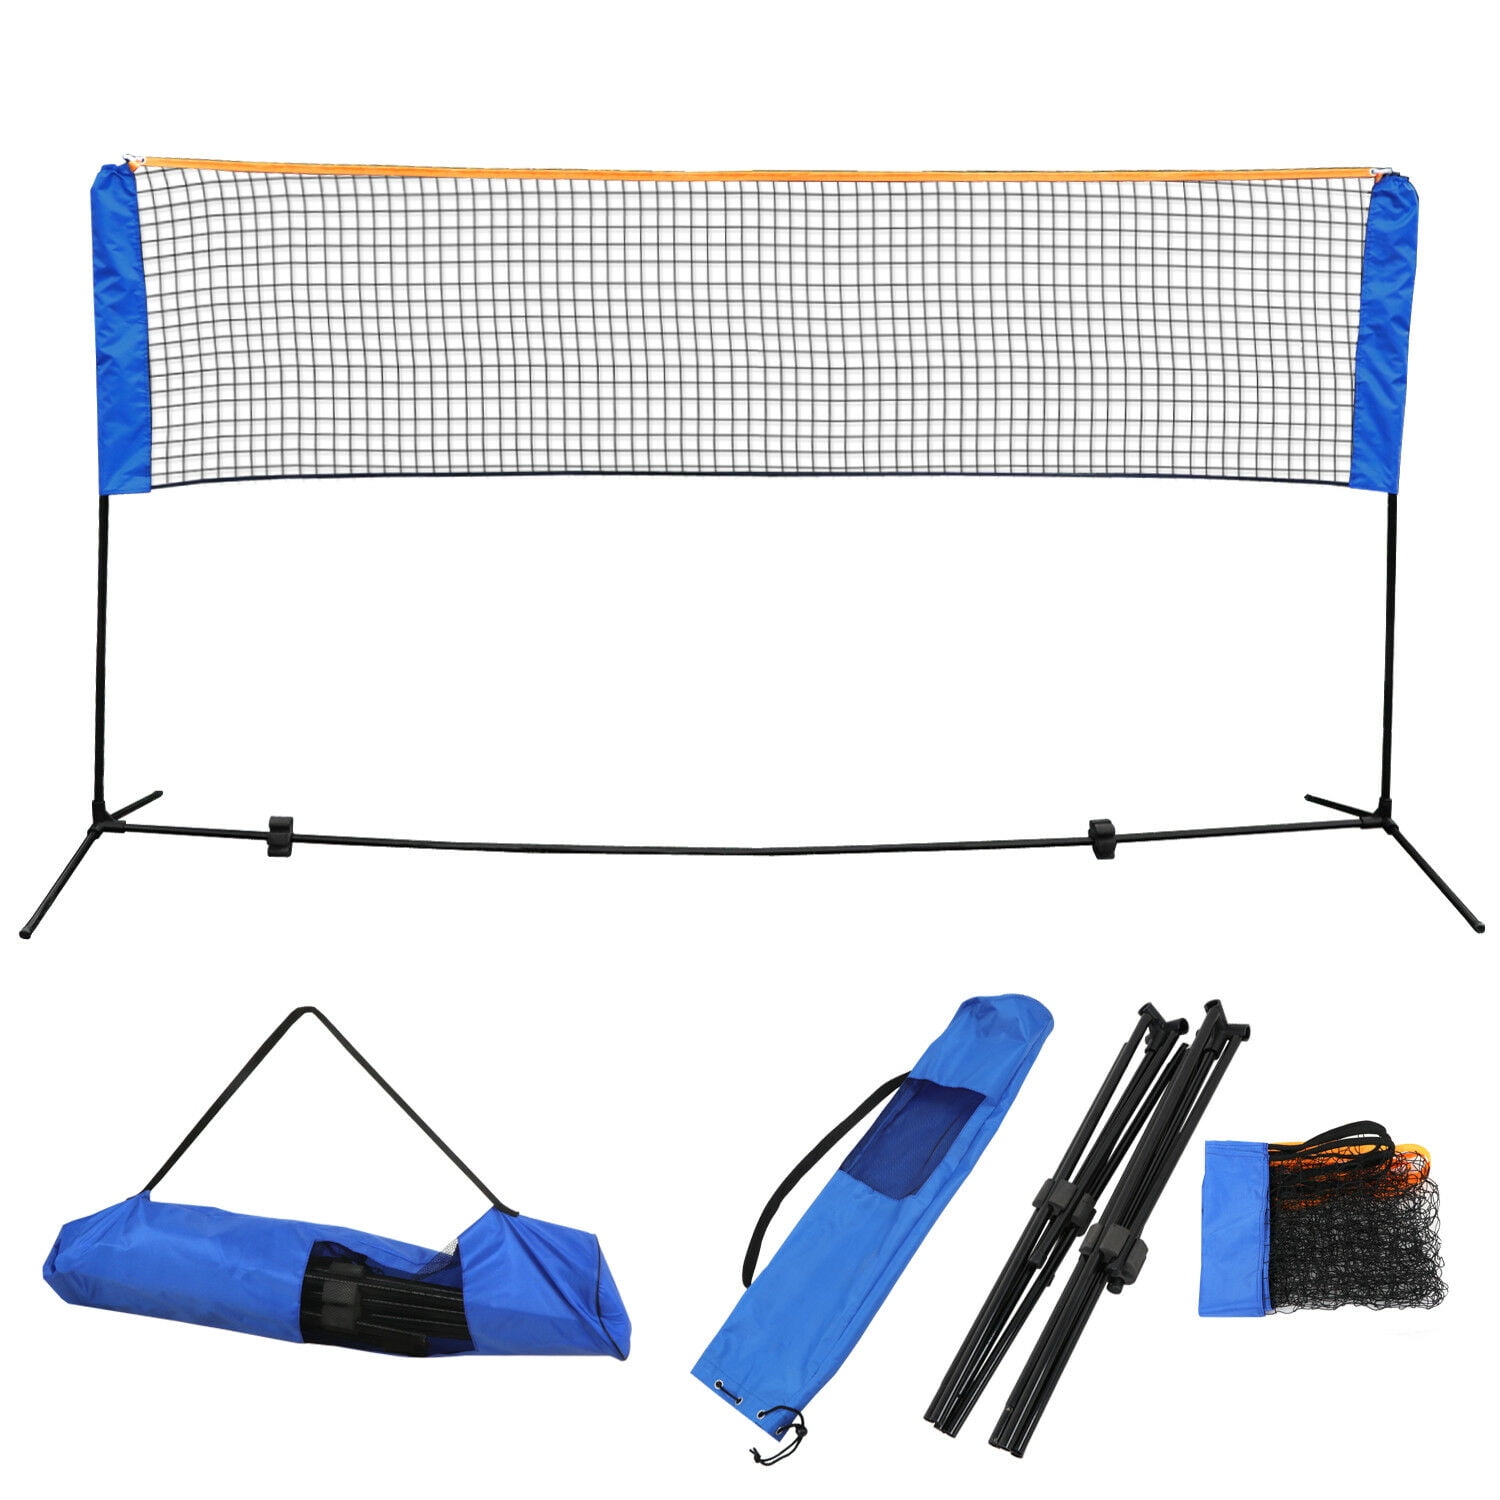 ZENSTYLE 10 Ft Long 5 Ft High Portable Badminton Net Beach Volleyball  Tennis Competition Sports Training Net Set w/Poles, Stand & Carrying  Bag,Height